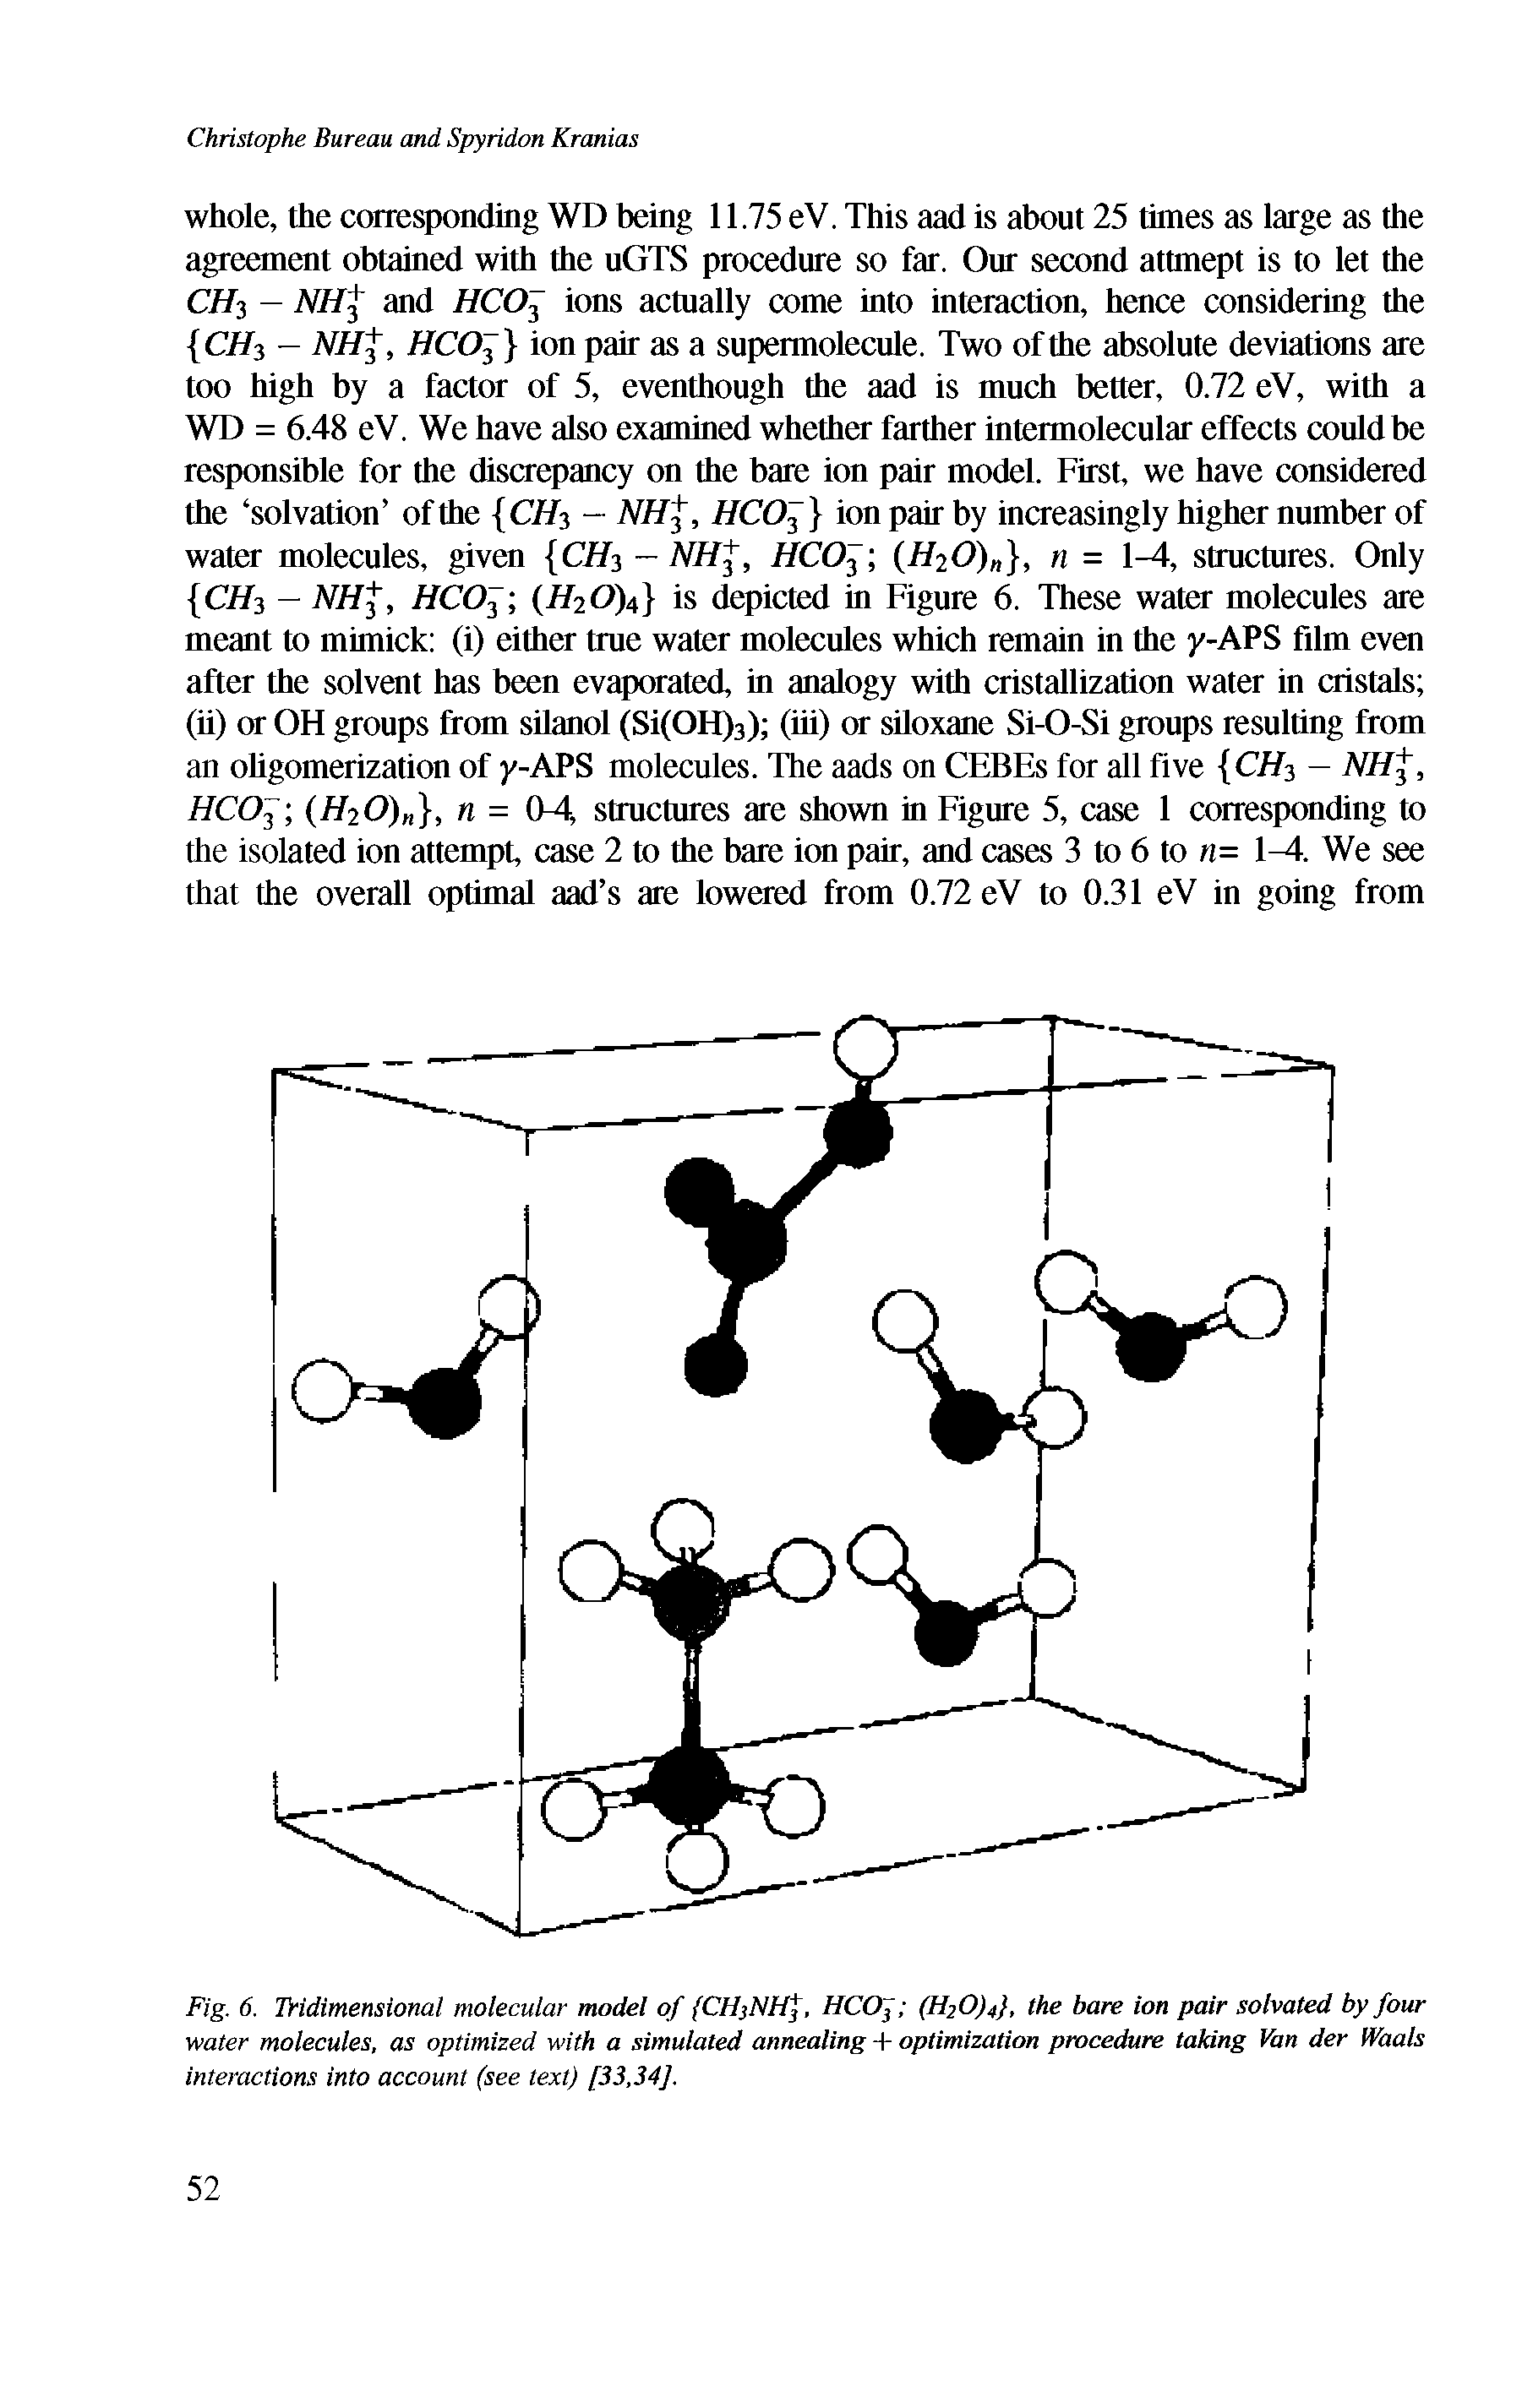 Fig. 6. Tridimensional molecular model of (CHjNHj, HCOJ (H20)4, the bare ion pair solvated by four water molecules, as optimized with a simulated annealing + optimization procedure taking Van der Waals interactions into account (see text) [33,34],...